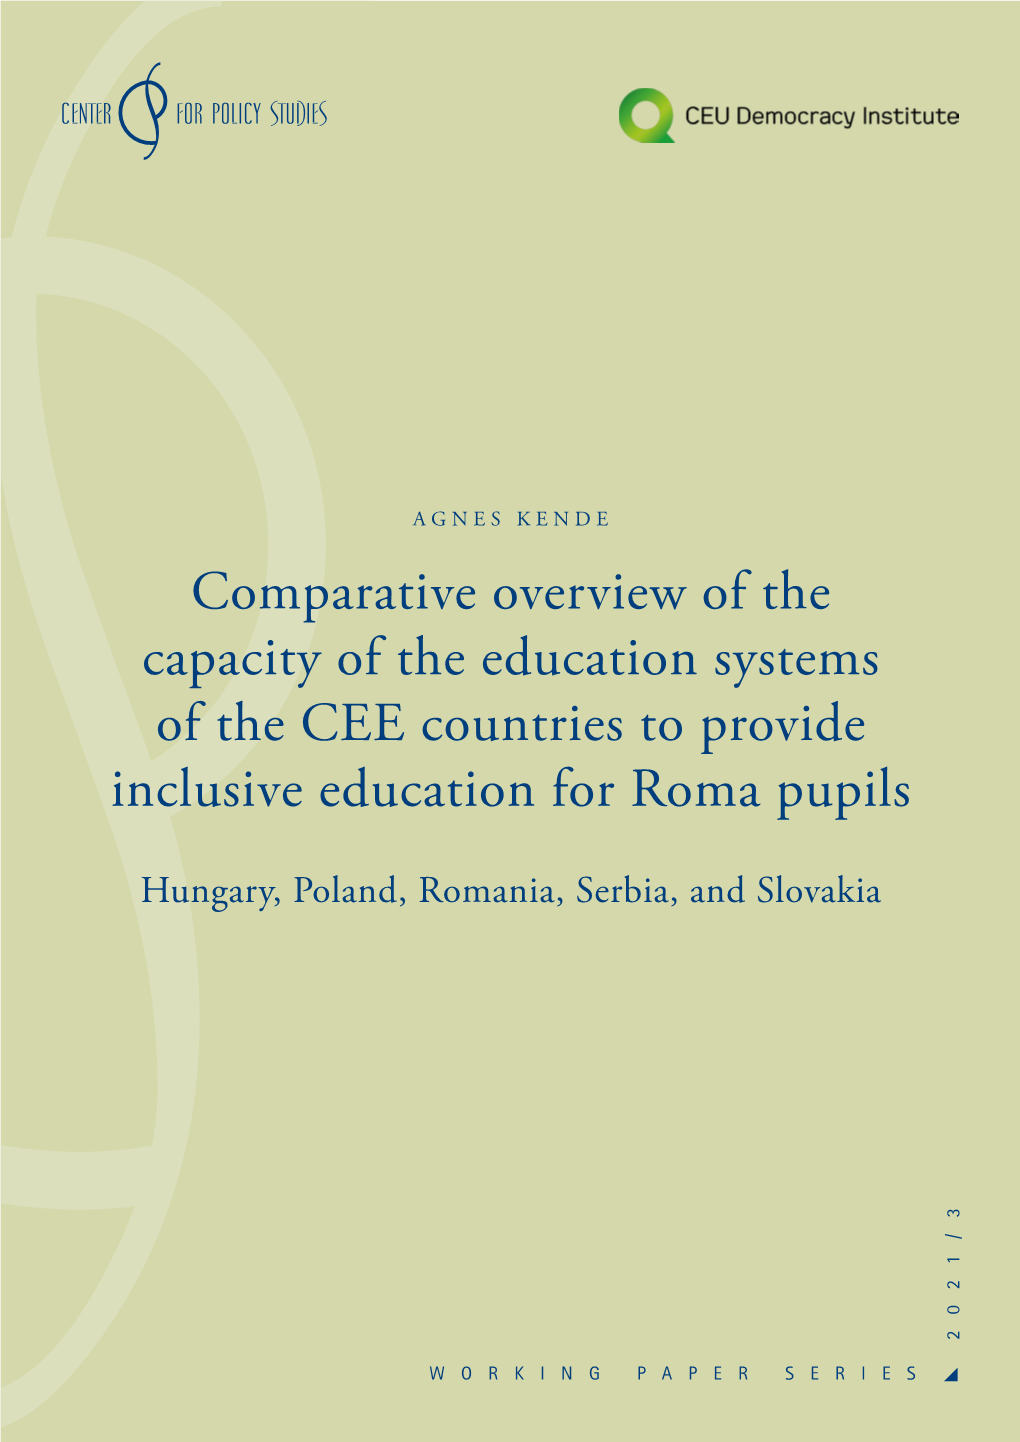 Comparative Overview of the Capacity of the Education Systems of the CEE Countries to Provide Inclusive Education for Roma Pupils